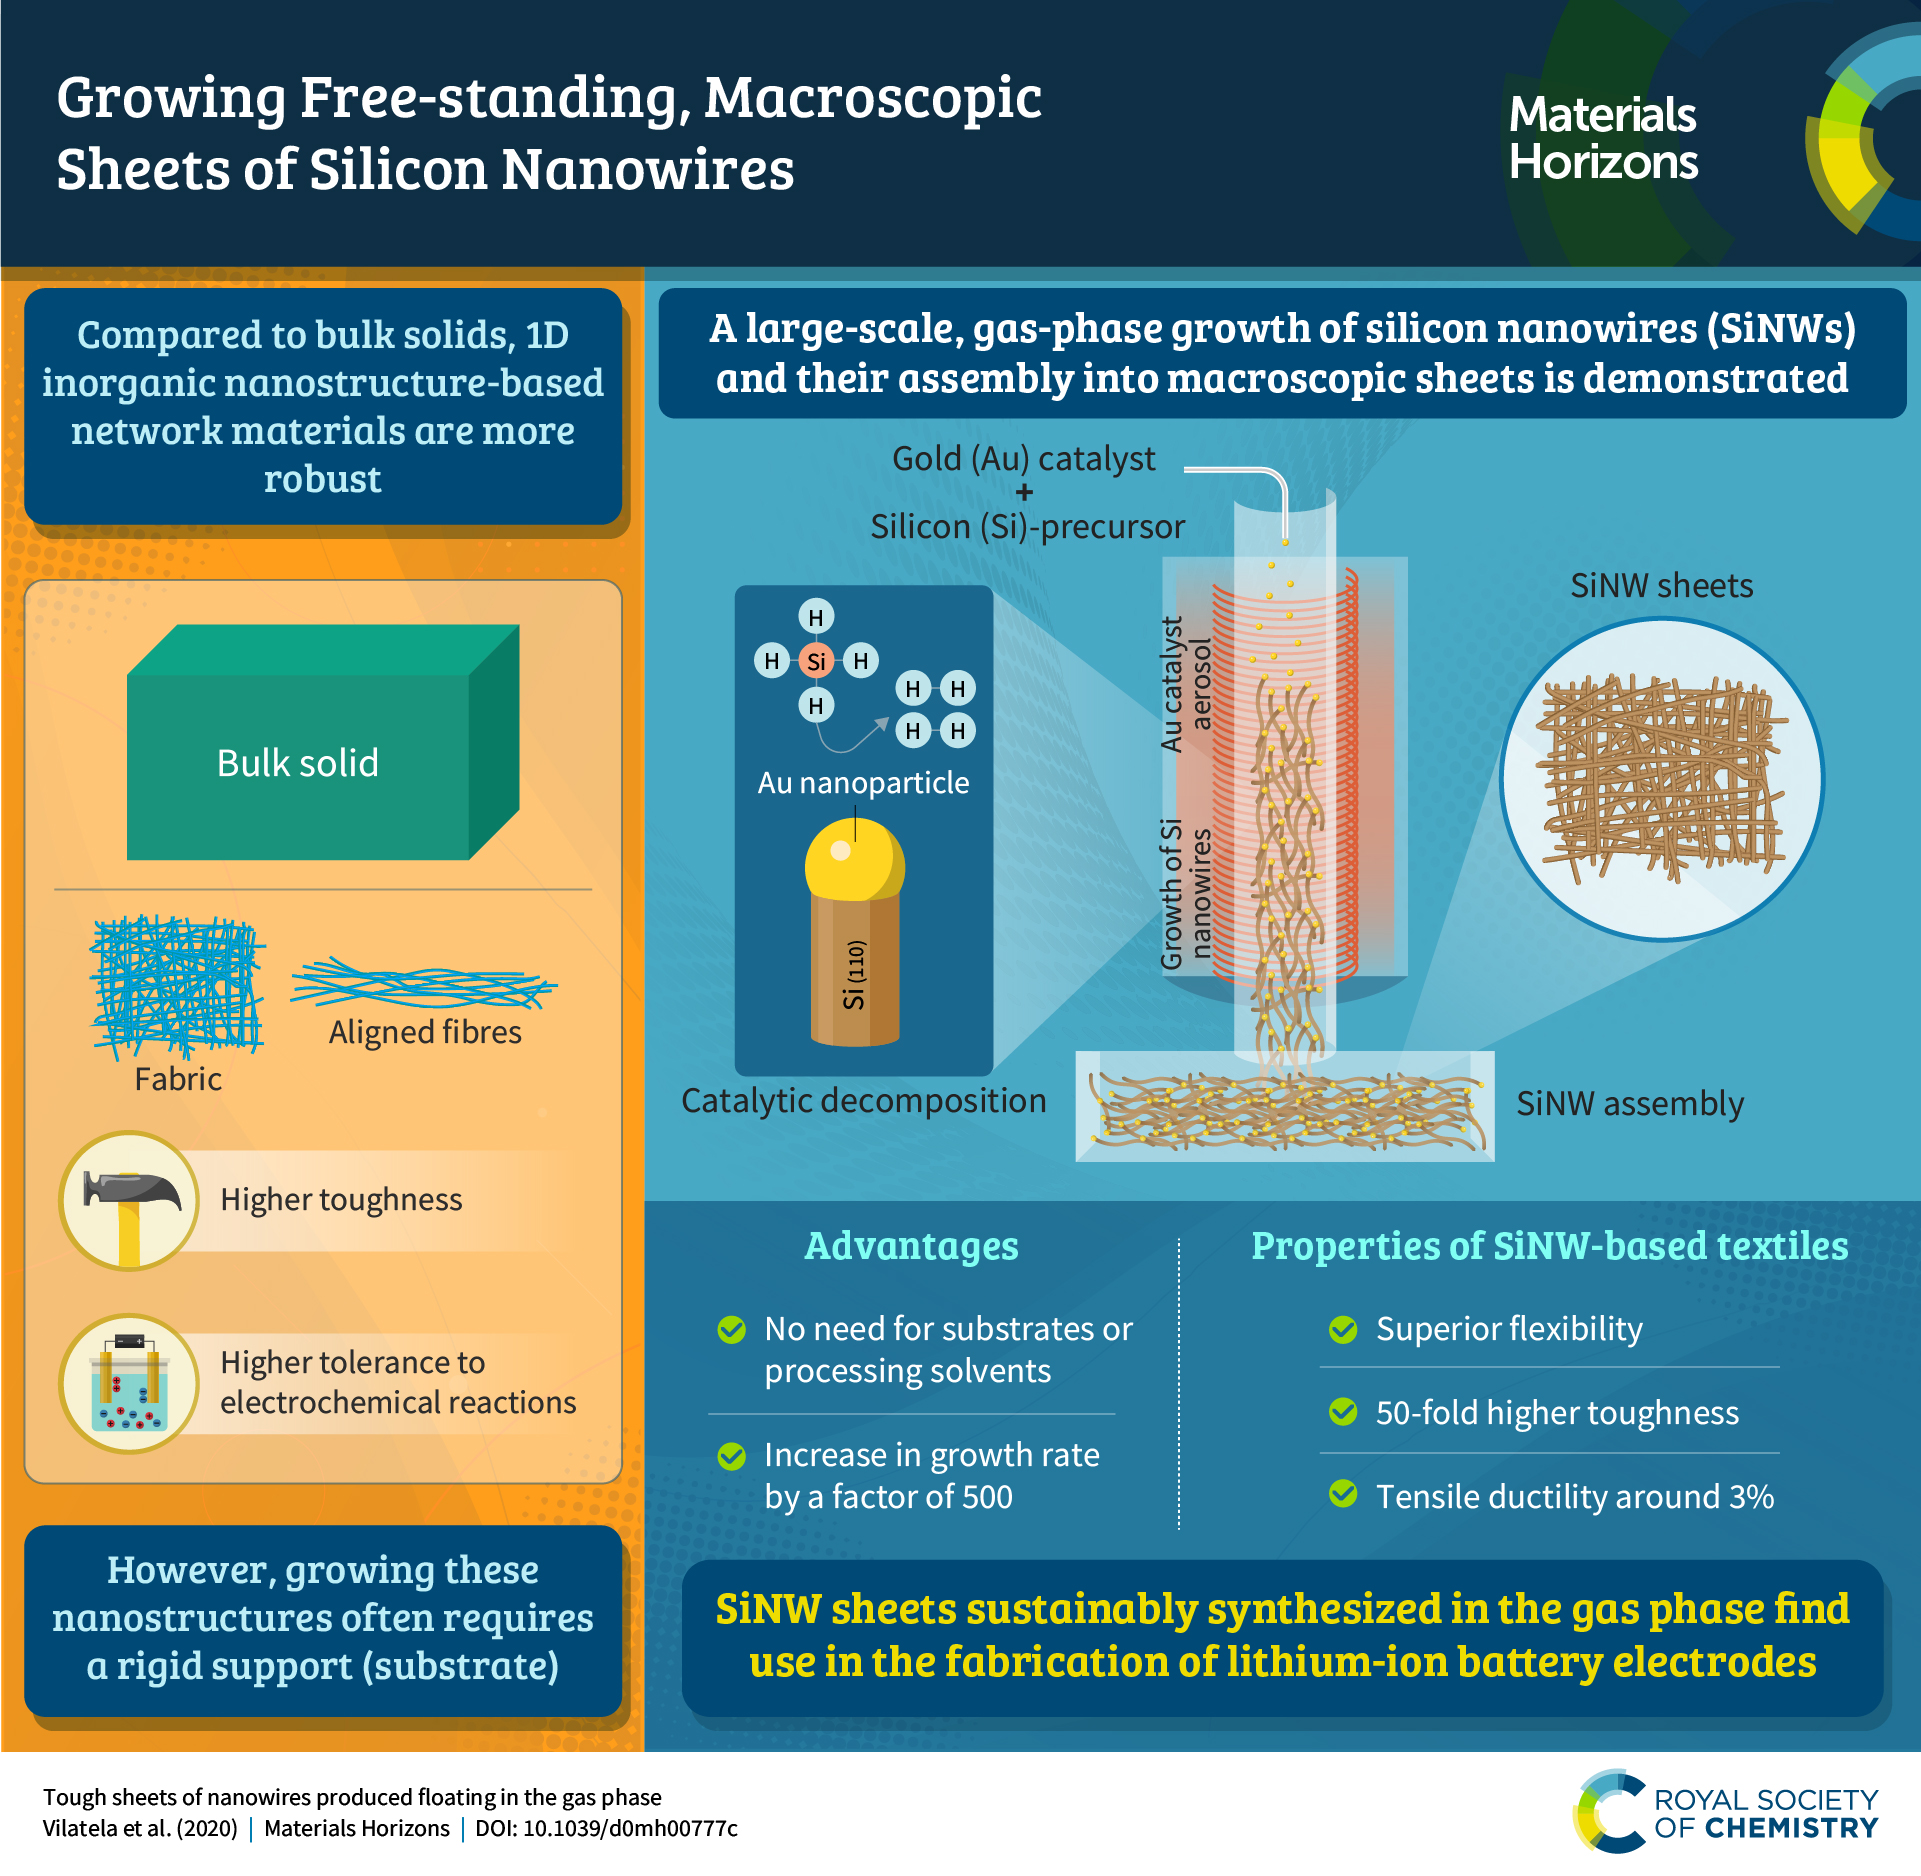 Infographic describing the content of the article: Tough sheets of nanowires produced floating in the gas phase